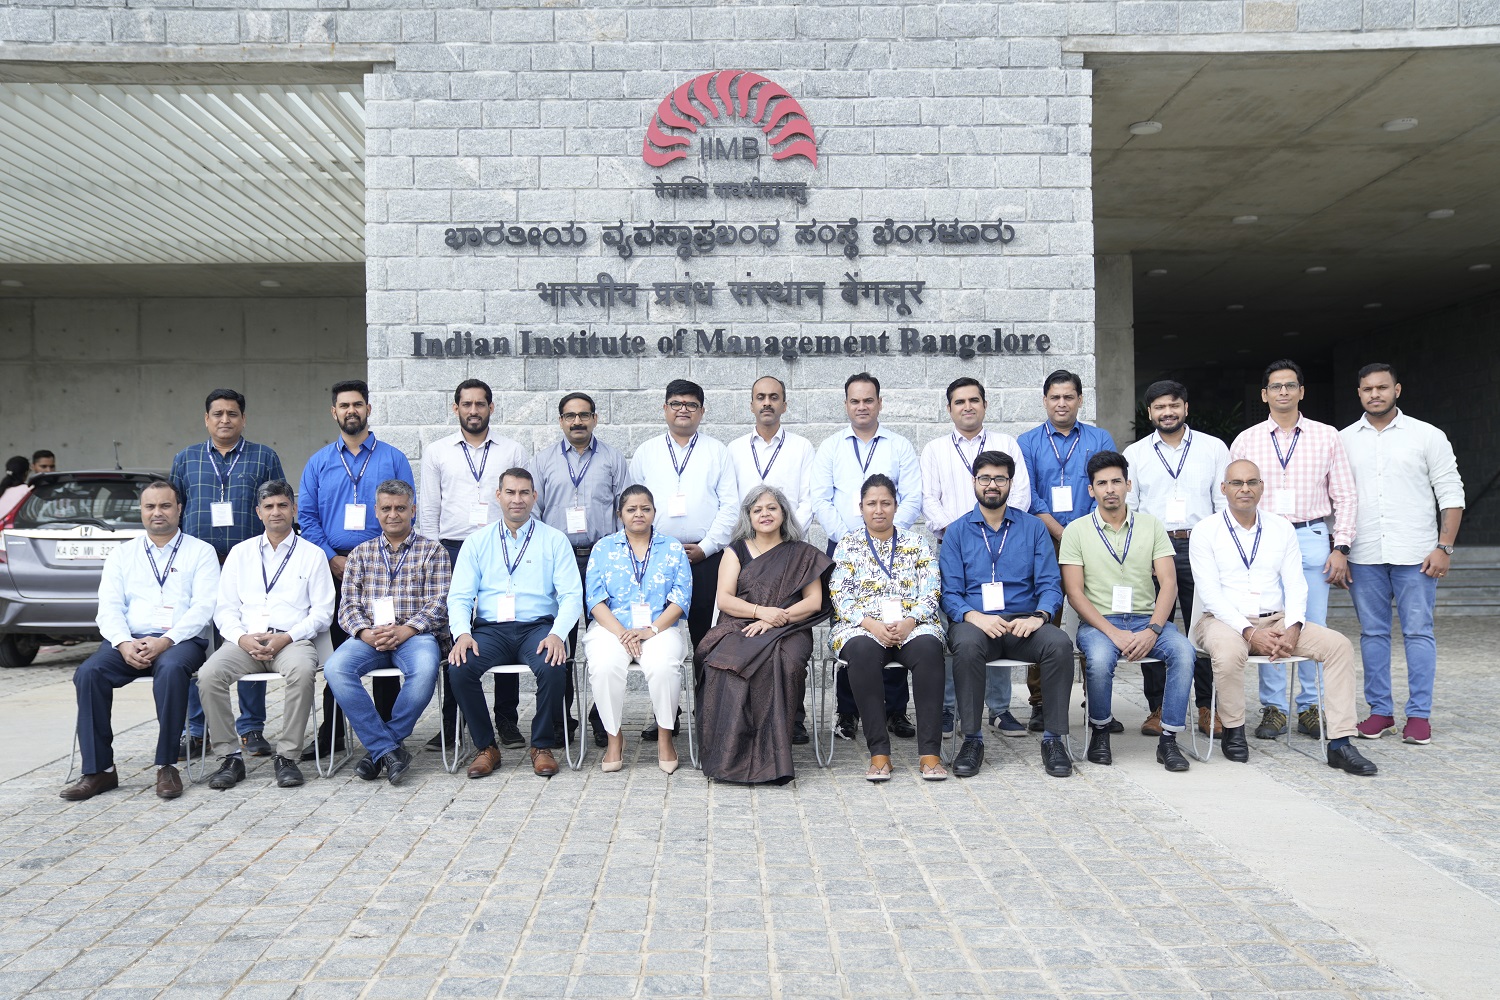 Participants of the Executive Education Programme, ‘Storytelling for Business Managers of Siemens Ltd’, along with the Faculty Programme Director, on 1st November 2023.